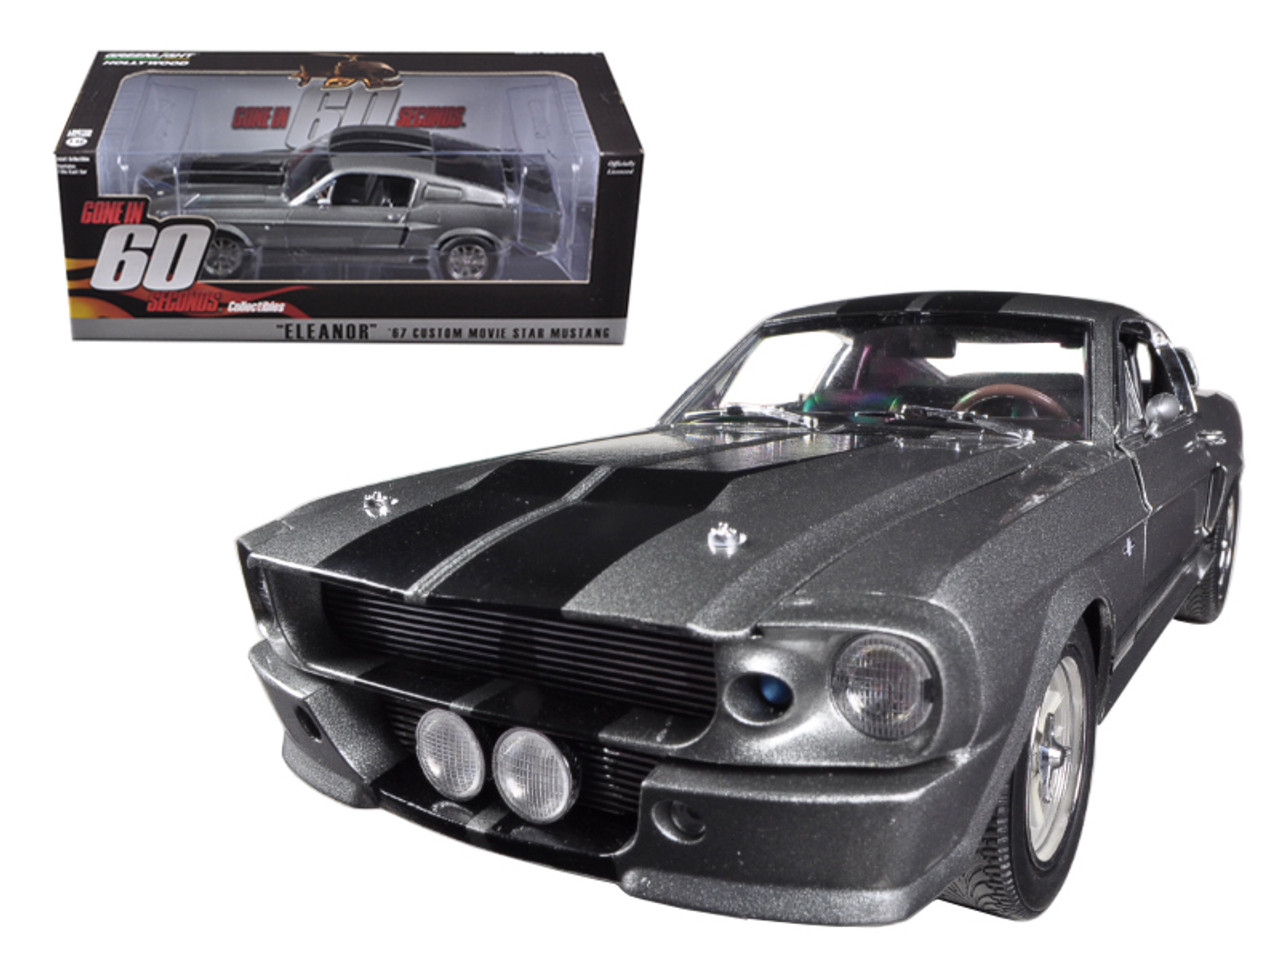 1/18 Greenlight 1967 Ford Mustang Custom Eleanor Gone in 60 Seconds  (2000) Movie Diecast Car Model